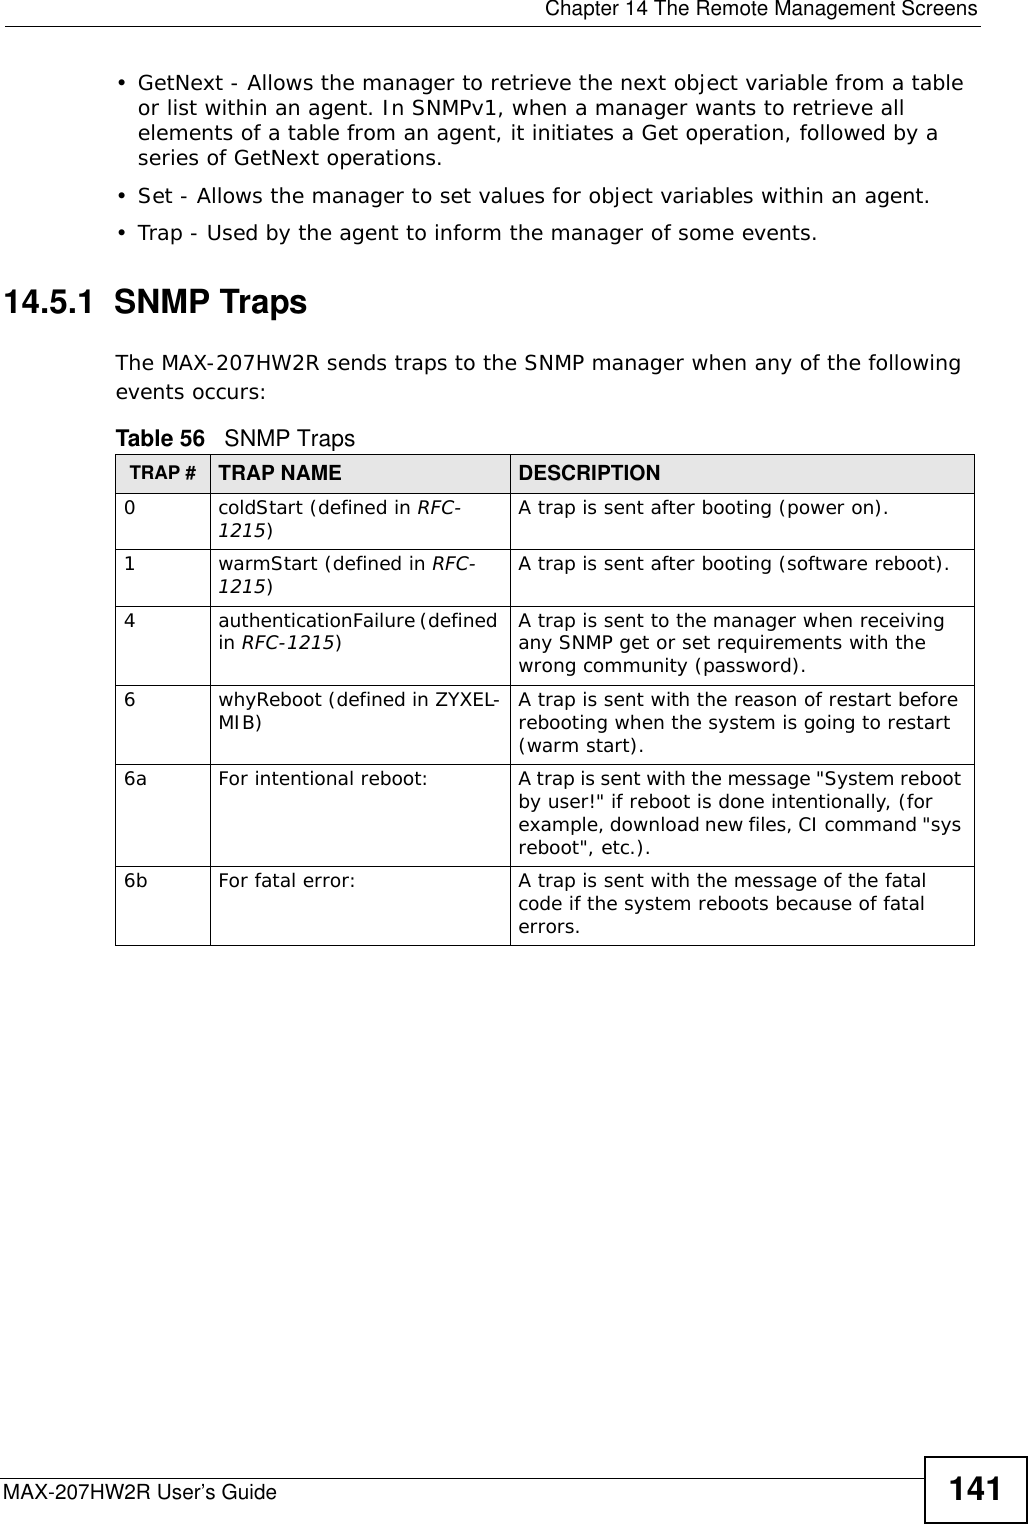  Chapter 14 The Remote Management ScreensMAX-207HW2R User’s Guide 141• GetNext - Allows the manager to retrieve the next object variable from a table or list within an agent. In SNMPv1, when a manager wants to retrieve all elements of a table from an agent, it initiates a Get operation, followed by a series of GetNext operations. • Set - Allows the manager to set values for object variables within an agent. • Trap - Used by the agent to inform the manager of some events.14.5.1  SNMP TrapsThe MAX-207HW2R sends traps to the SNMP manager when any of the following events occurs:          Table 56   SNMP TrapsTRAP # TRAP NAME DESCRIPTION0coldStart (defined in RFC-1215)A trap is sent after booting (power on).1warmStart (defined in RFC-1215)A trap is sent after booting (software reboot).4authenticationFailure (defined in RFC-1215)A trap is sent to the manager when receiving any SNMP get or set requirements with the wrong community (password).6whyReboot (defined in ZYXEL-MIB) A trap is sent with the reason of restart before rebooting when the system is going to restart (warm start).6a For intentional reboot: A trap is sent with the message &quot;System reboot by user!&quot; if reboot is done intentionally, (for example, download new files, CI command &quot;sys reboot&quot;, etc.).6b For fatal error:  A trap is sent with the message of the fatal code if the system reboots because of fatal errors.